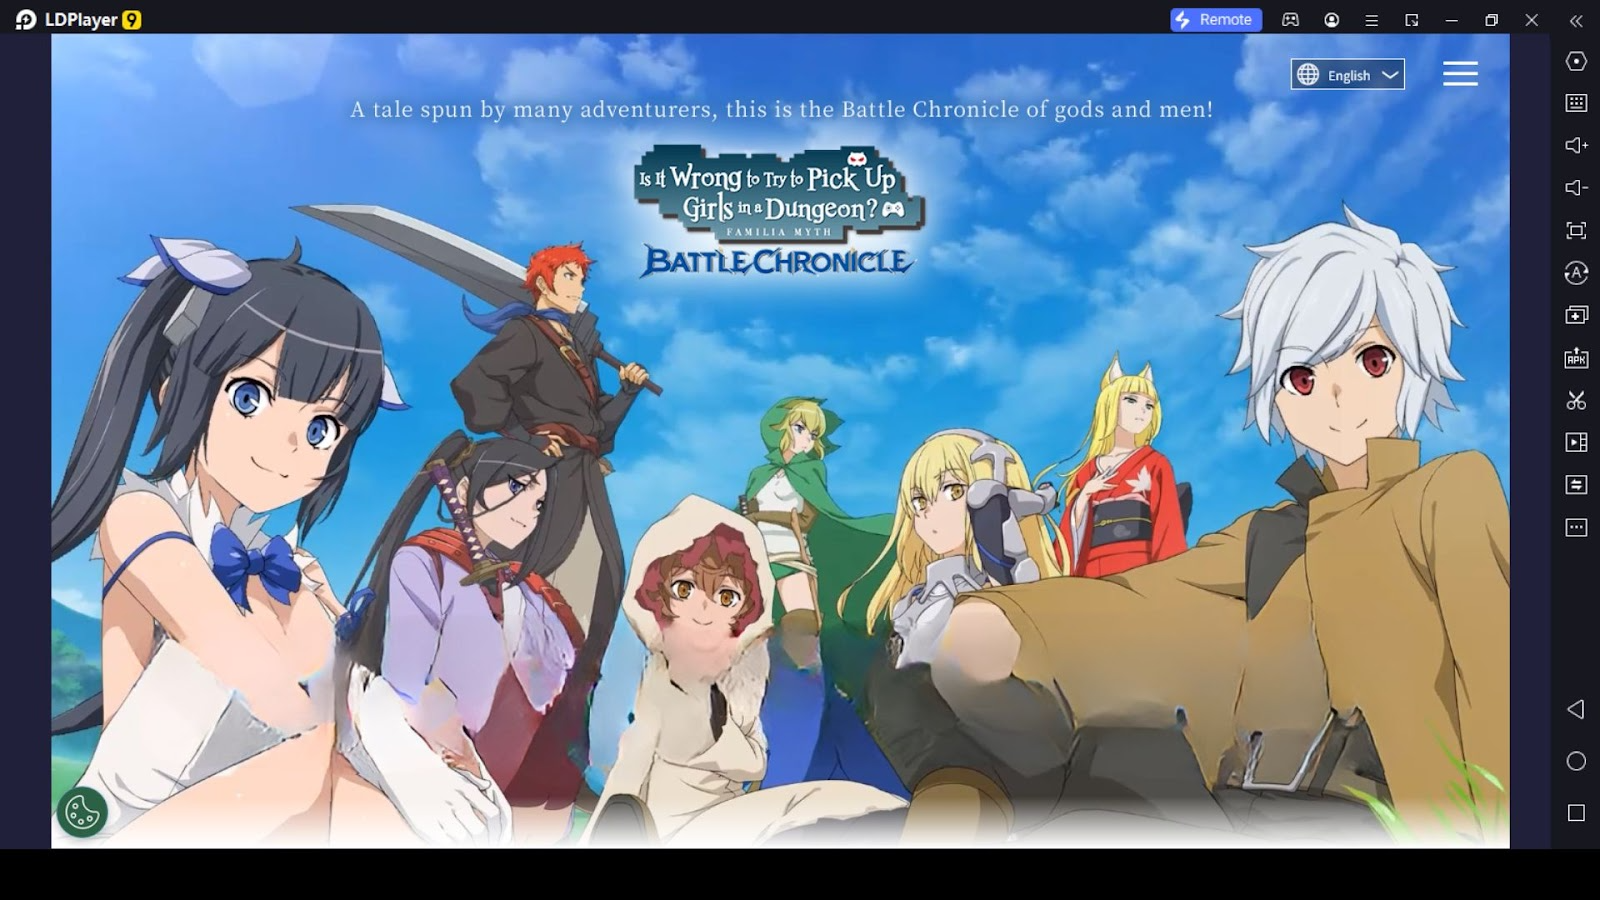 Dupe System Stands for in DanMachi BATTLE CHRONICLE